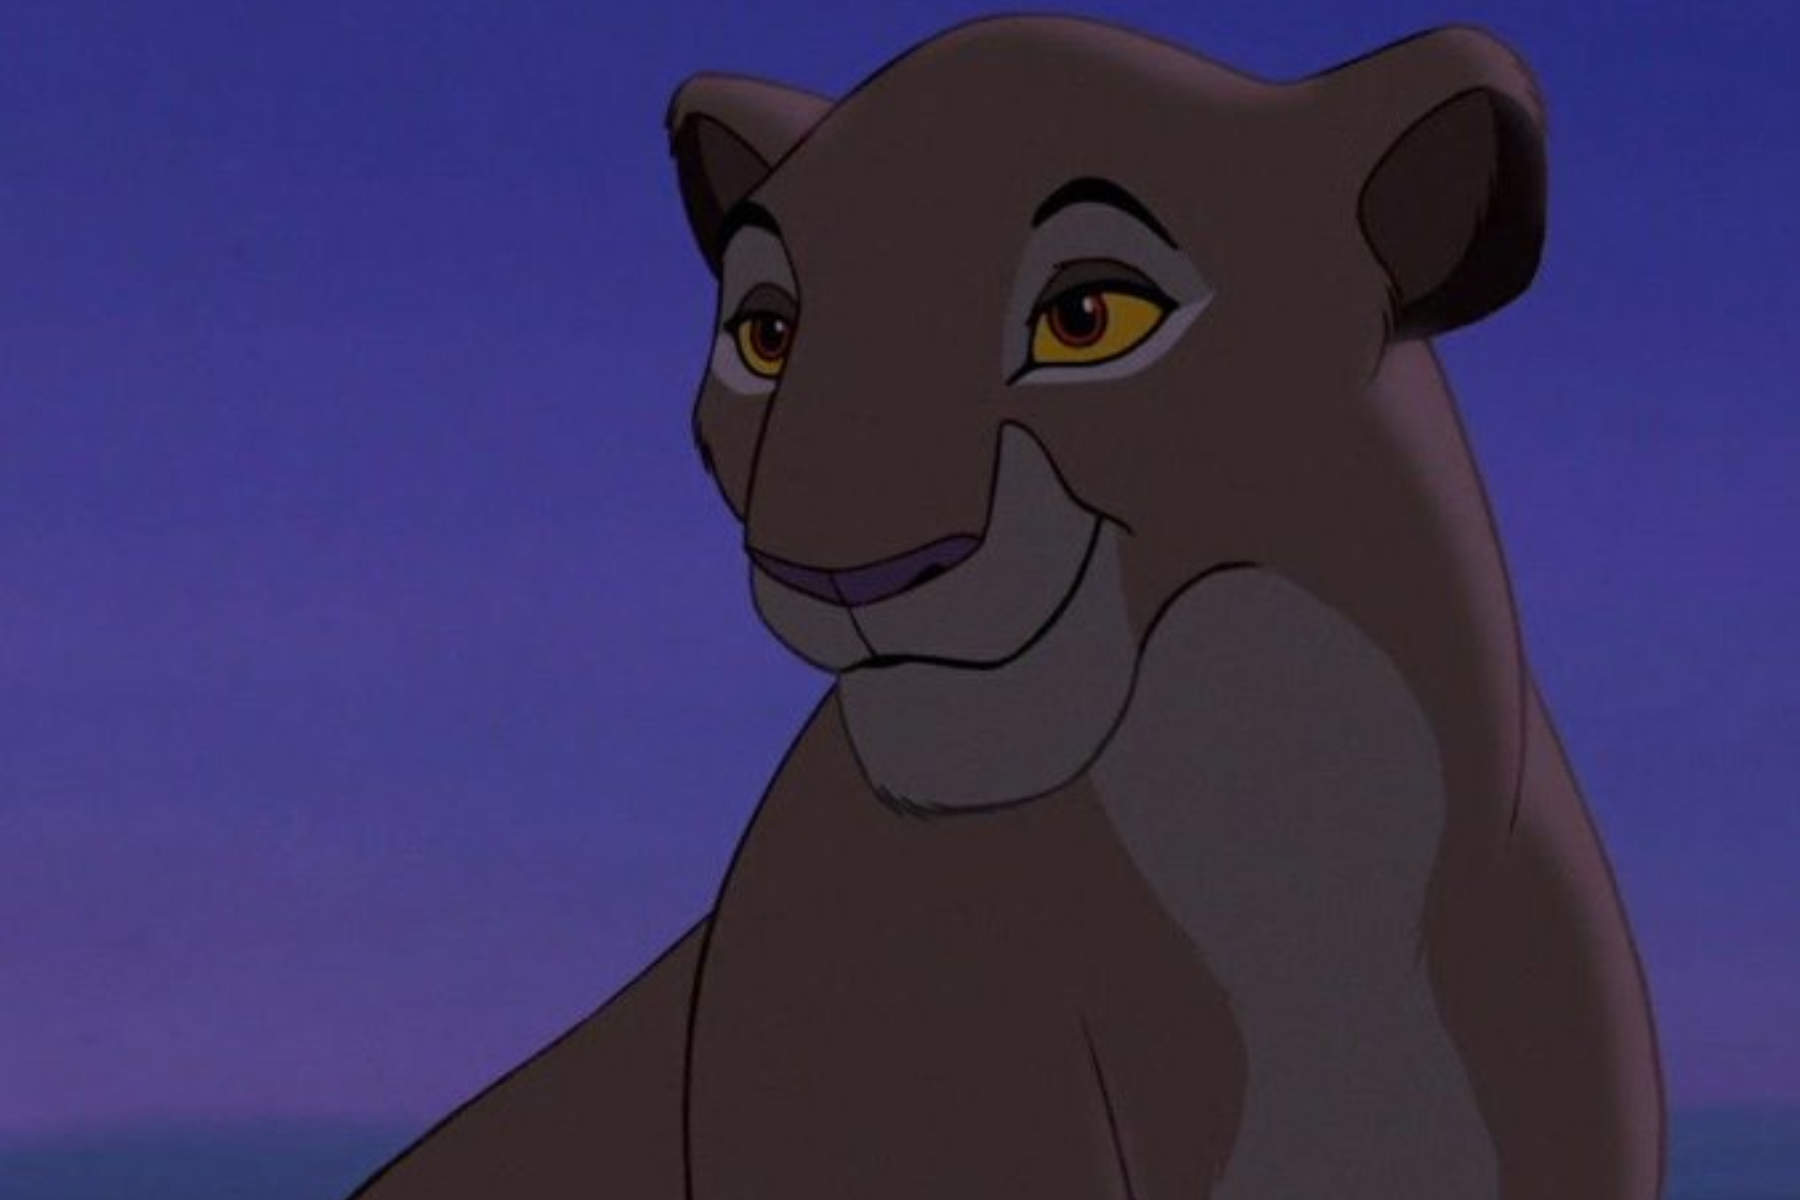 Sarabi The Lion King is sitting next to a blue background